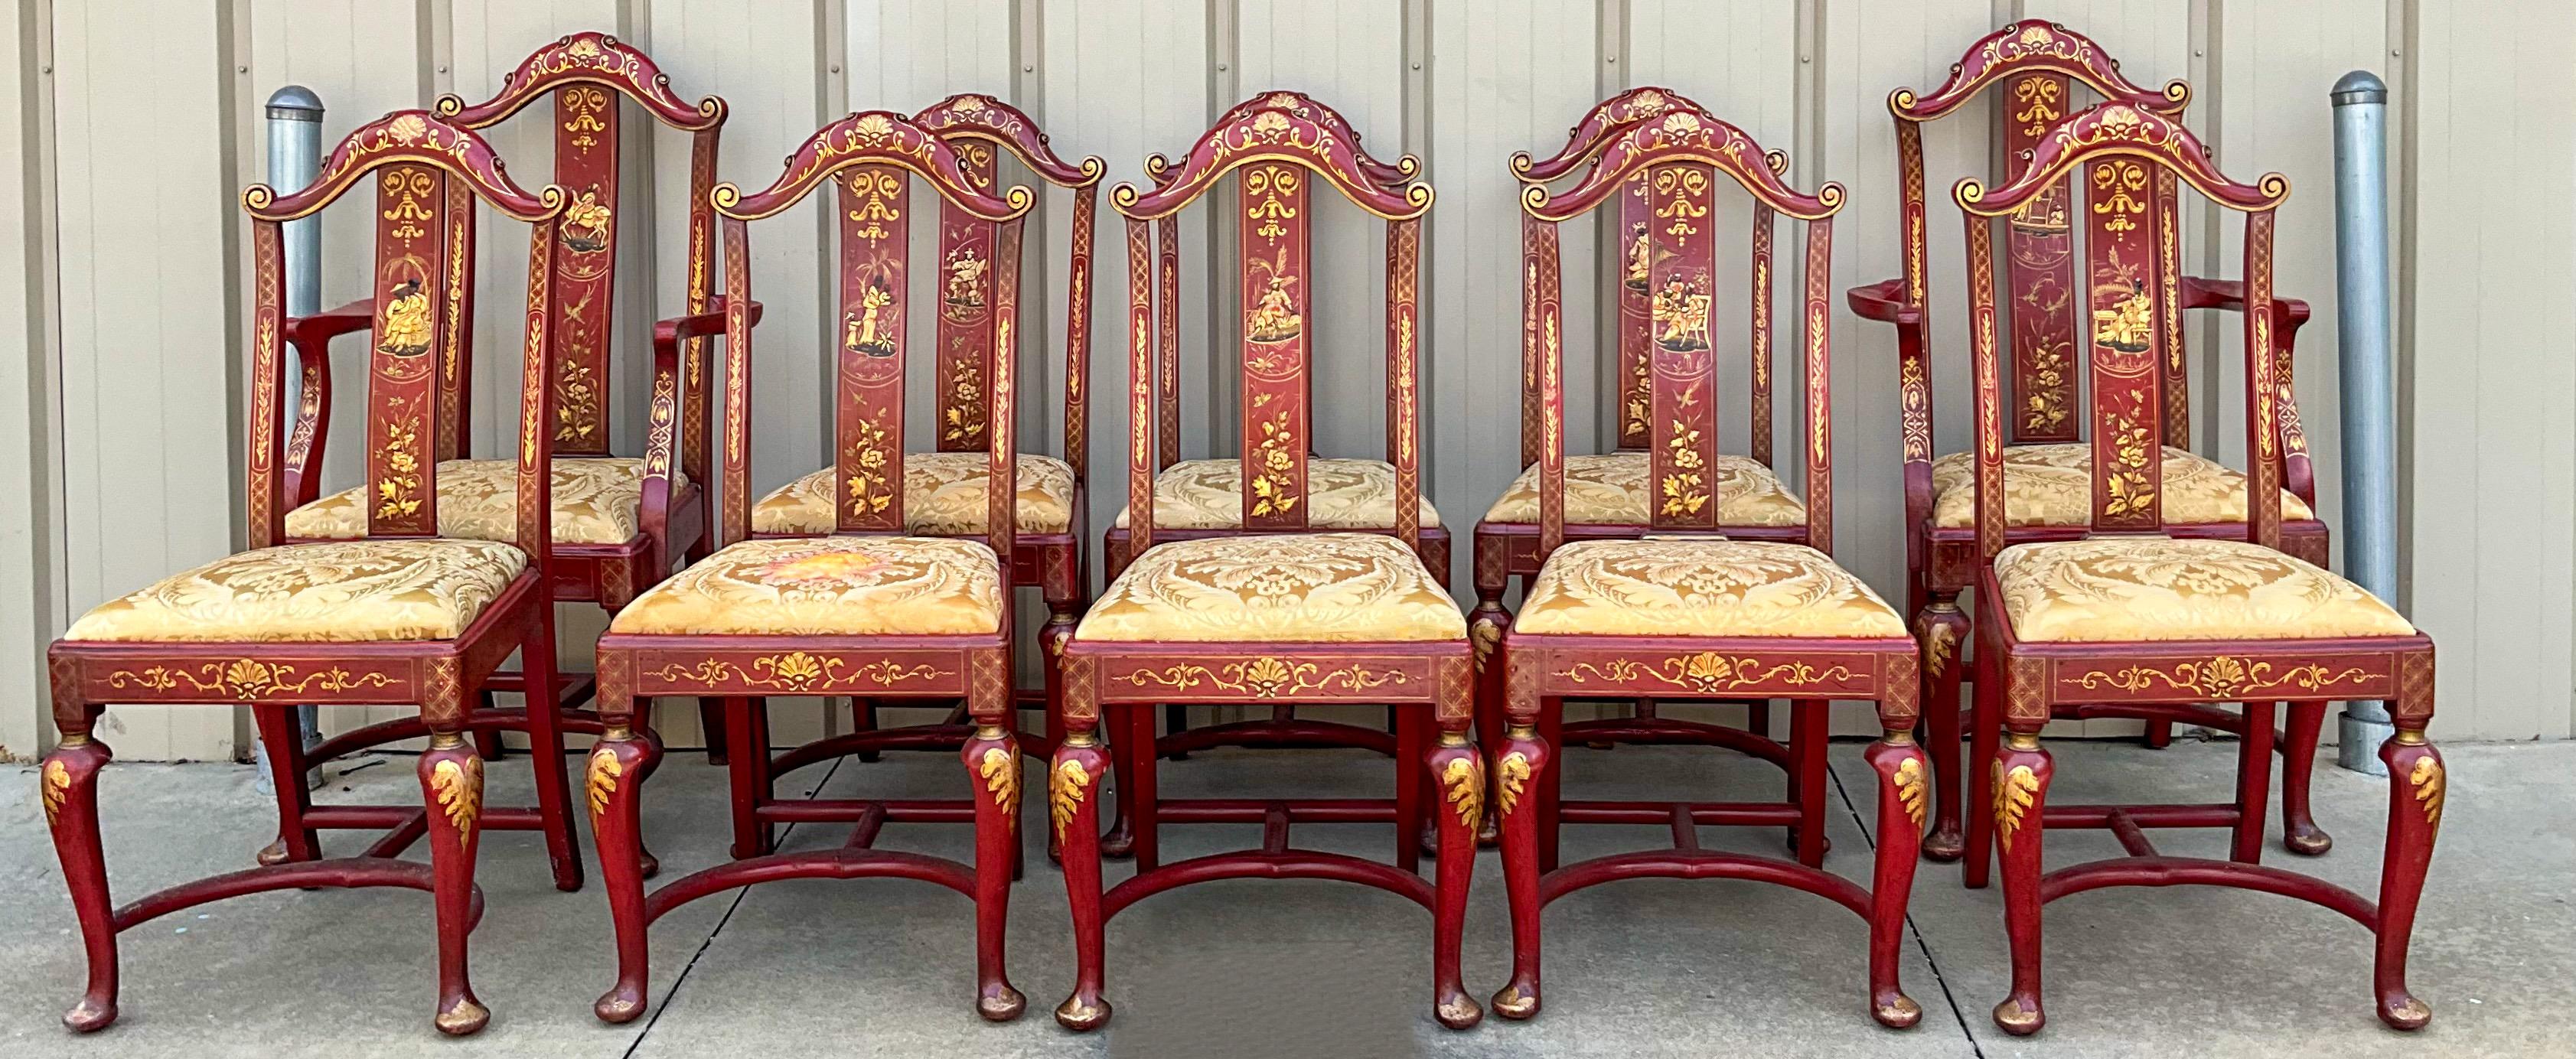 This is a fabulous set of English Queen Anne style chinoiserie dining chairs.Each one is hand painted with a unique pastoral scene and gilt accents. Sadly two seats show wear, with one being significant. However, the seats are not attached which